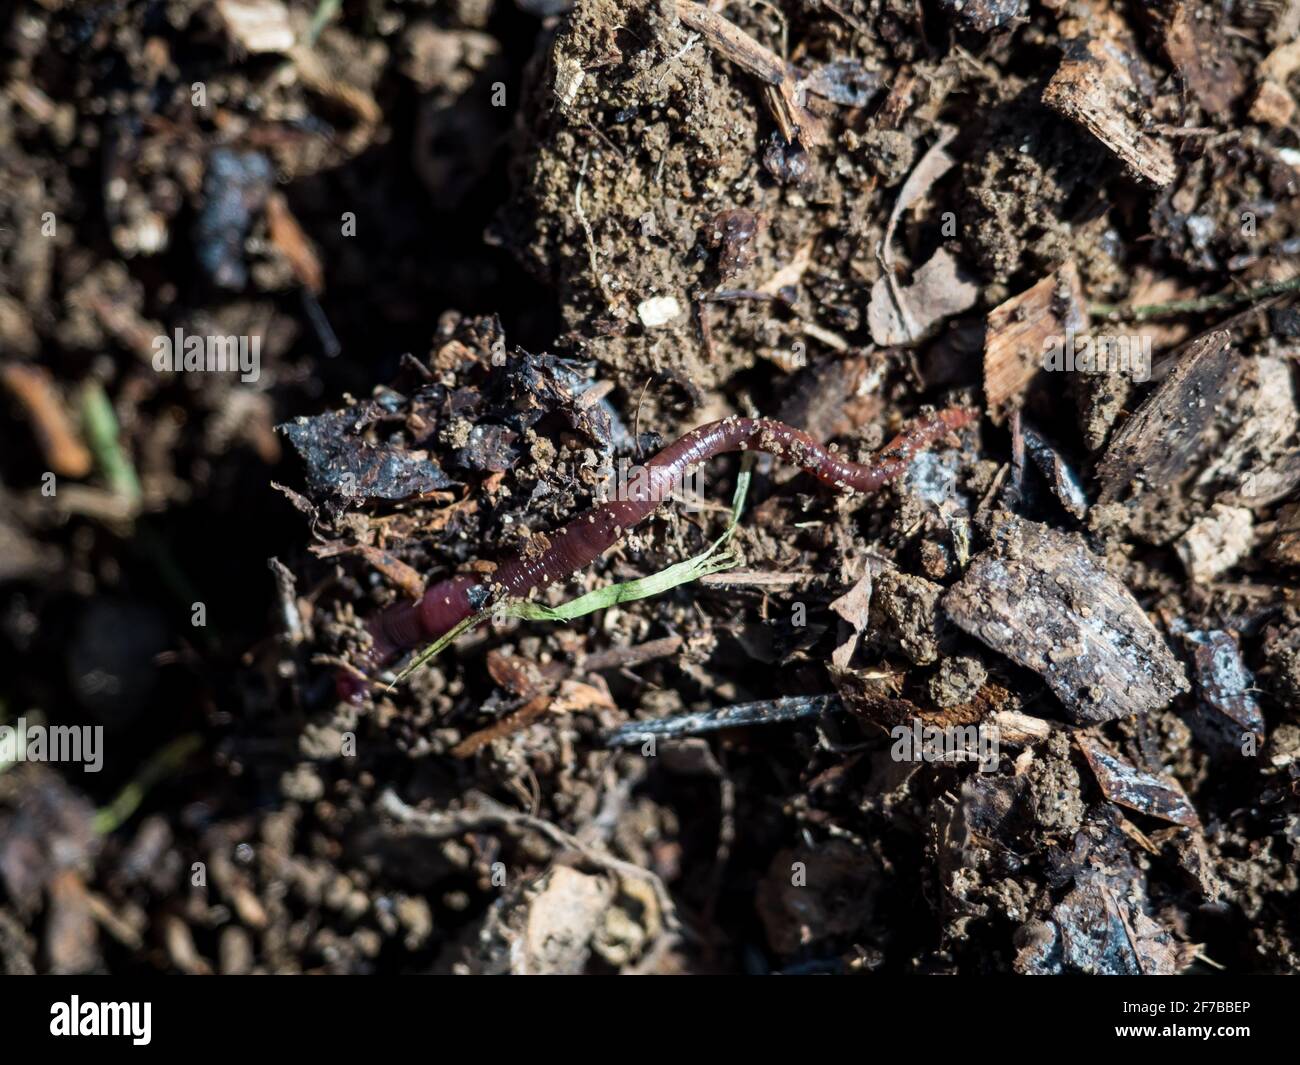 Earthworm on a permaculture fertile rich soil with shredded wood Stock Photo